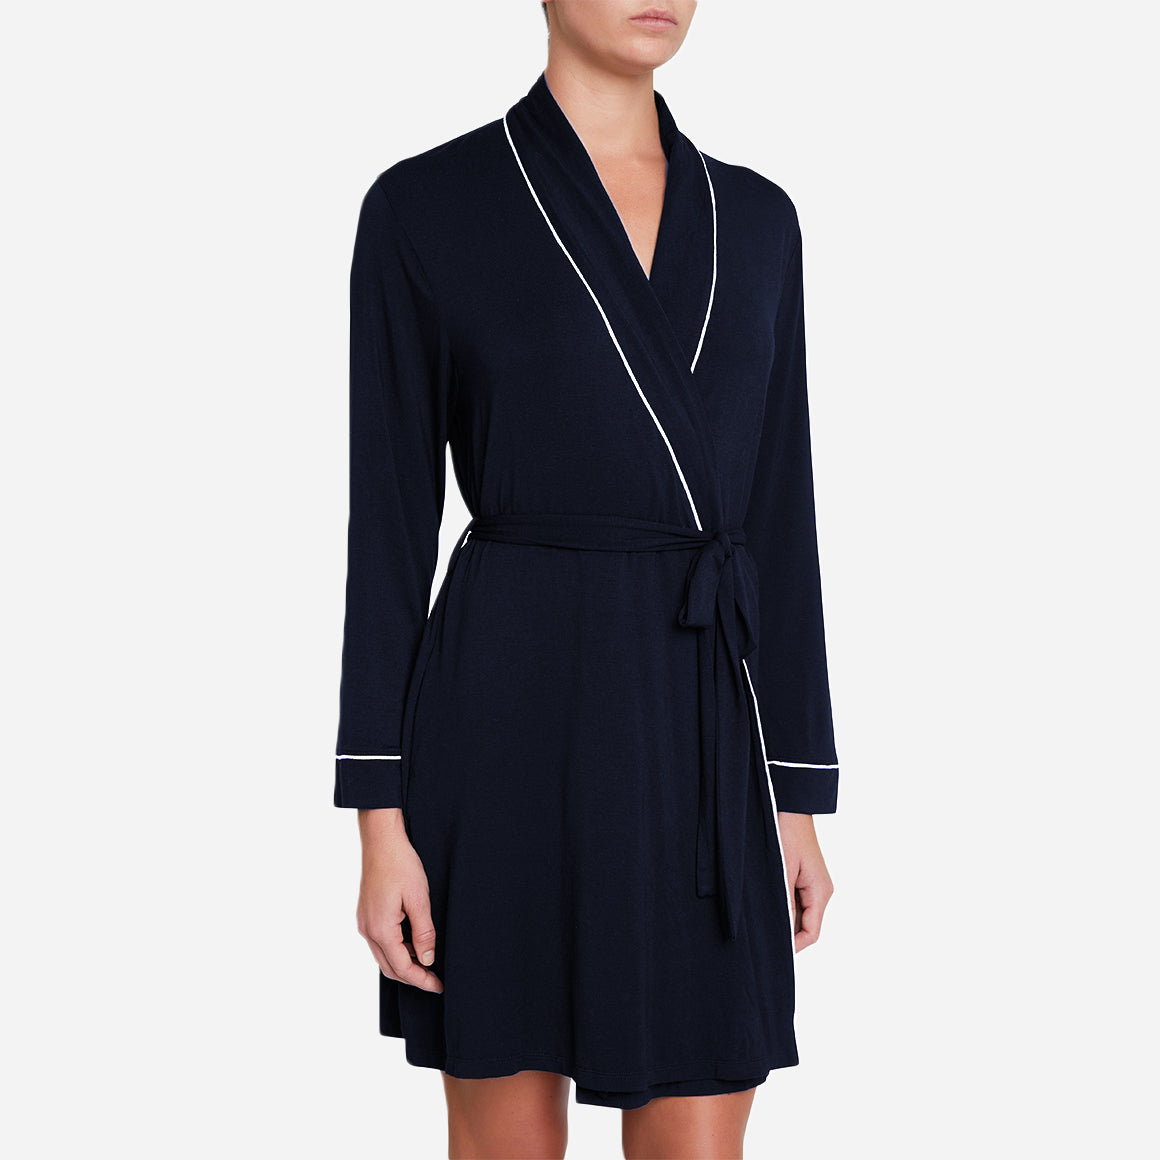 The Gisele Robe features a classic silhouette with a flattering knee-length cut, making it suitable for lounging at home or for a relaxed yet chic look when entertaining guests. The self-tie belt allows you to adjust the fit to your preference, while the wide lapel collar adds a touch of elegance.